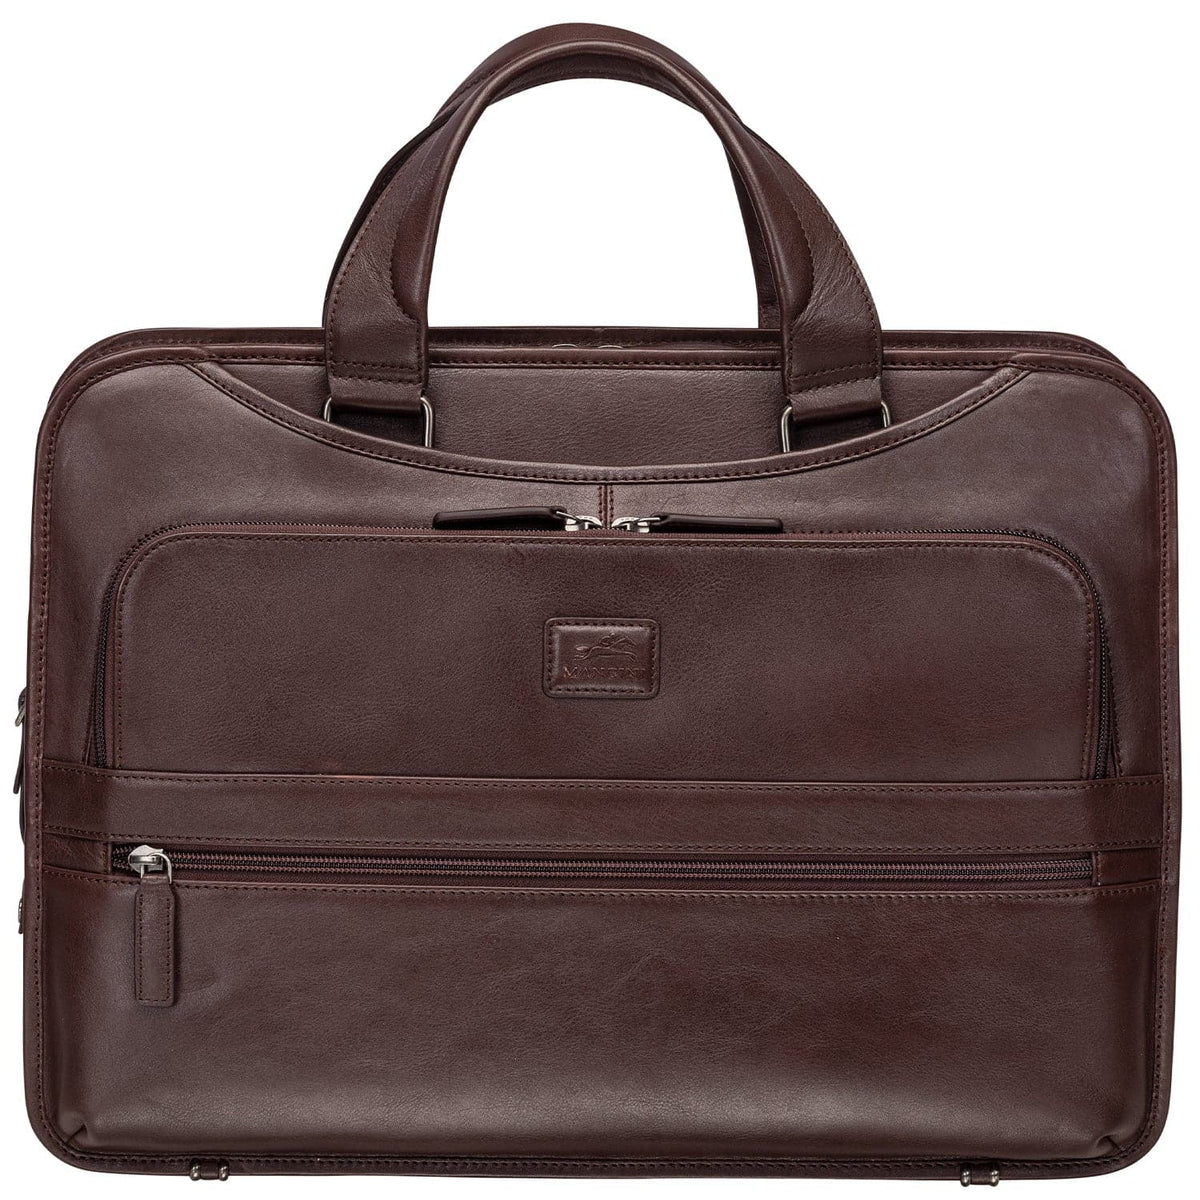 Mancini Milan Triple Compartment Briefcase for 15.6” Laptop / Tablet